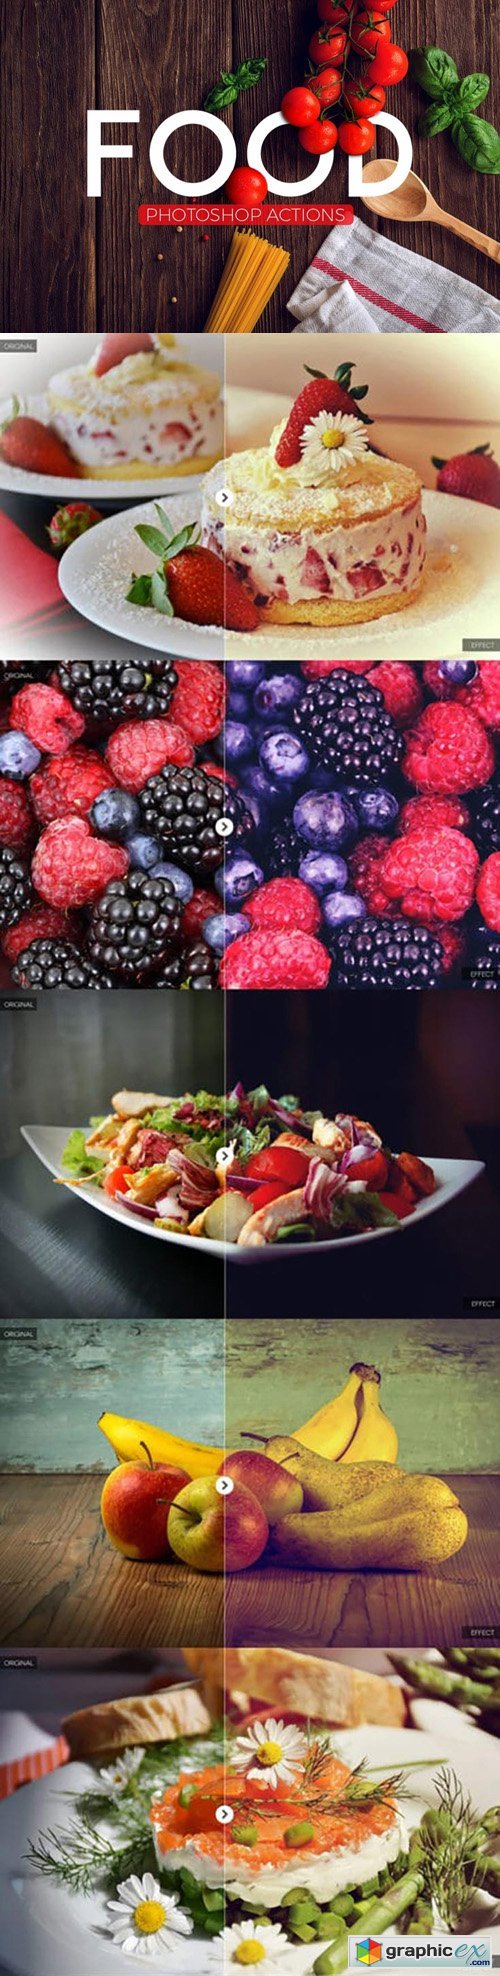 Photoshop Actions for Food Photography Vol.3